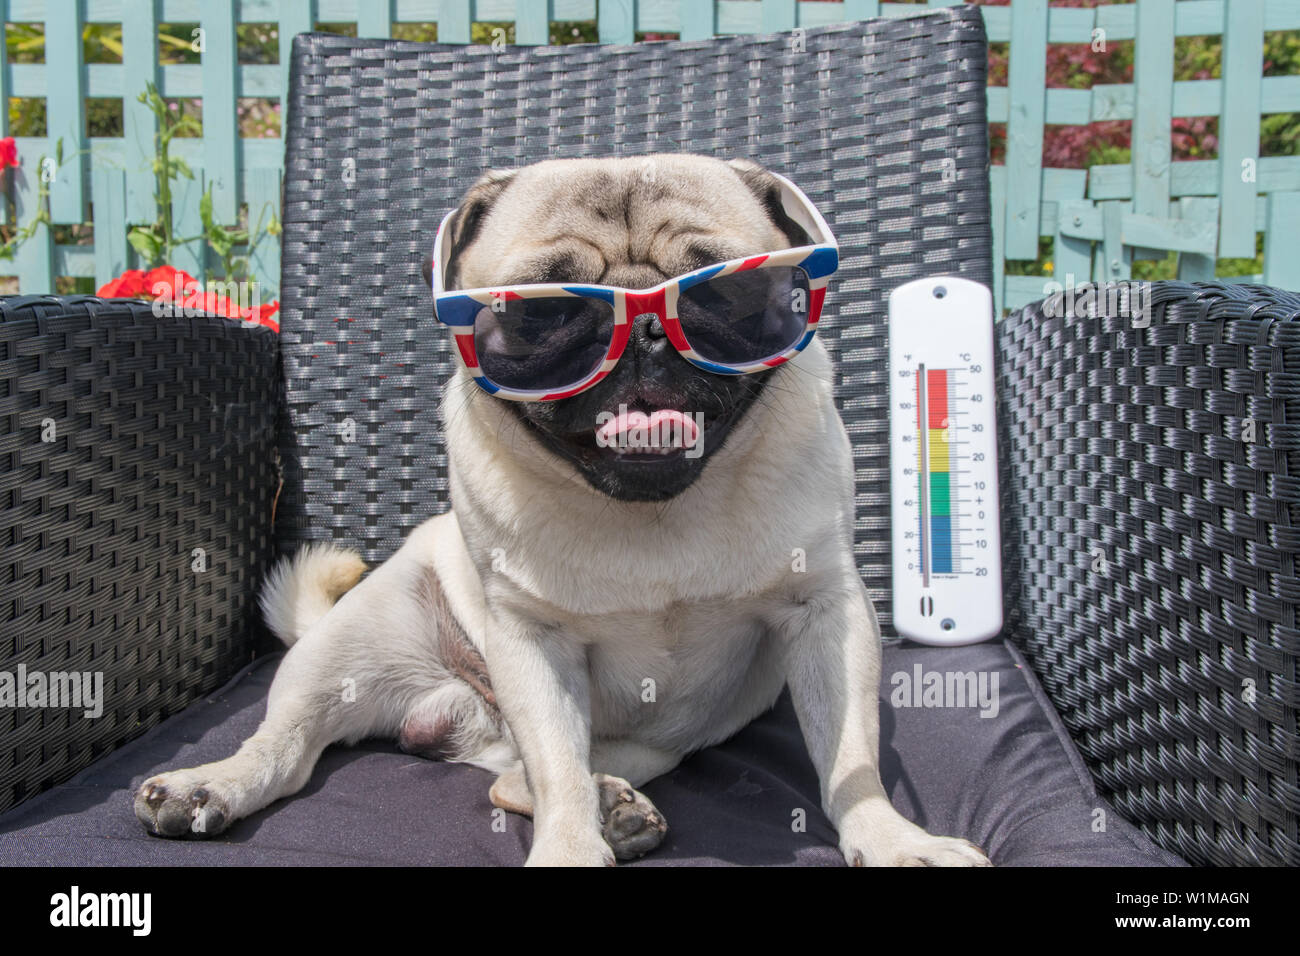 Pug Dog Sitting On Chair Wearing Sunglasses Panting In Hot